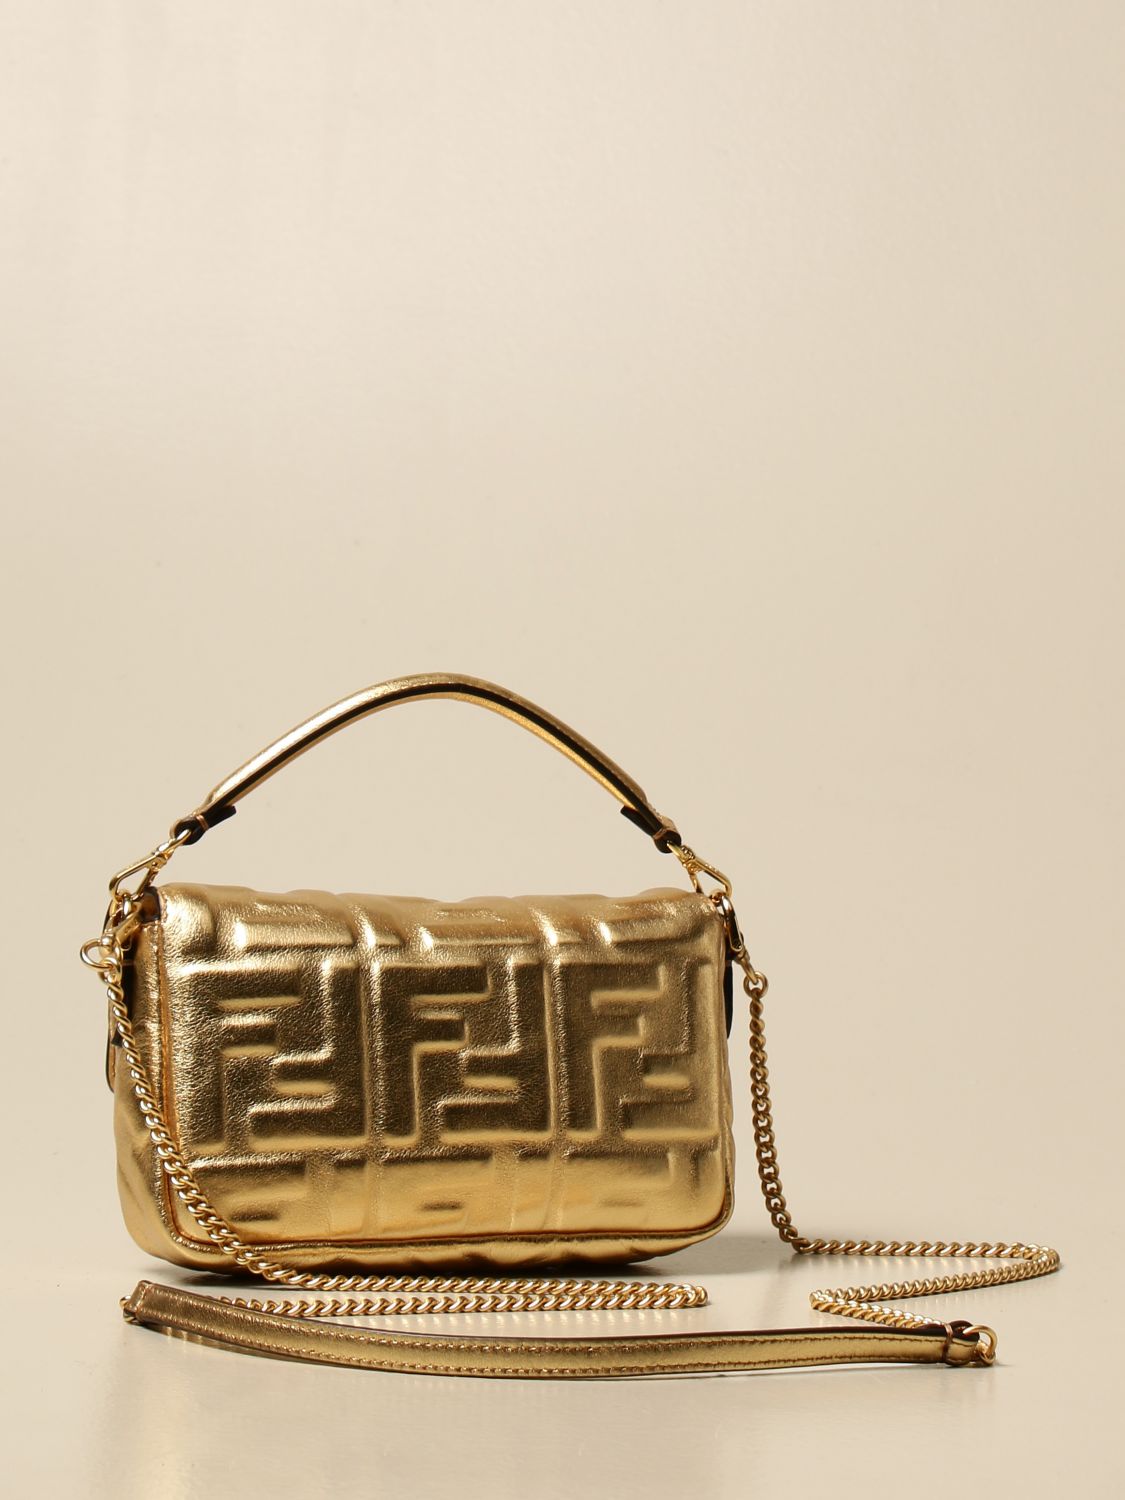 Fendi Baguette bag in laminated leather with embossed FF logo